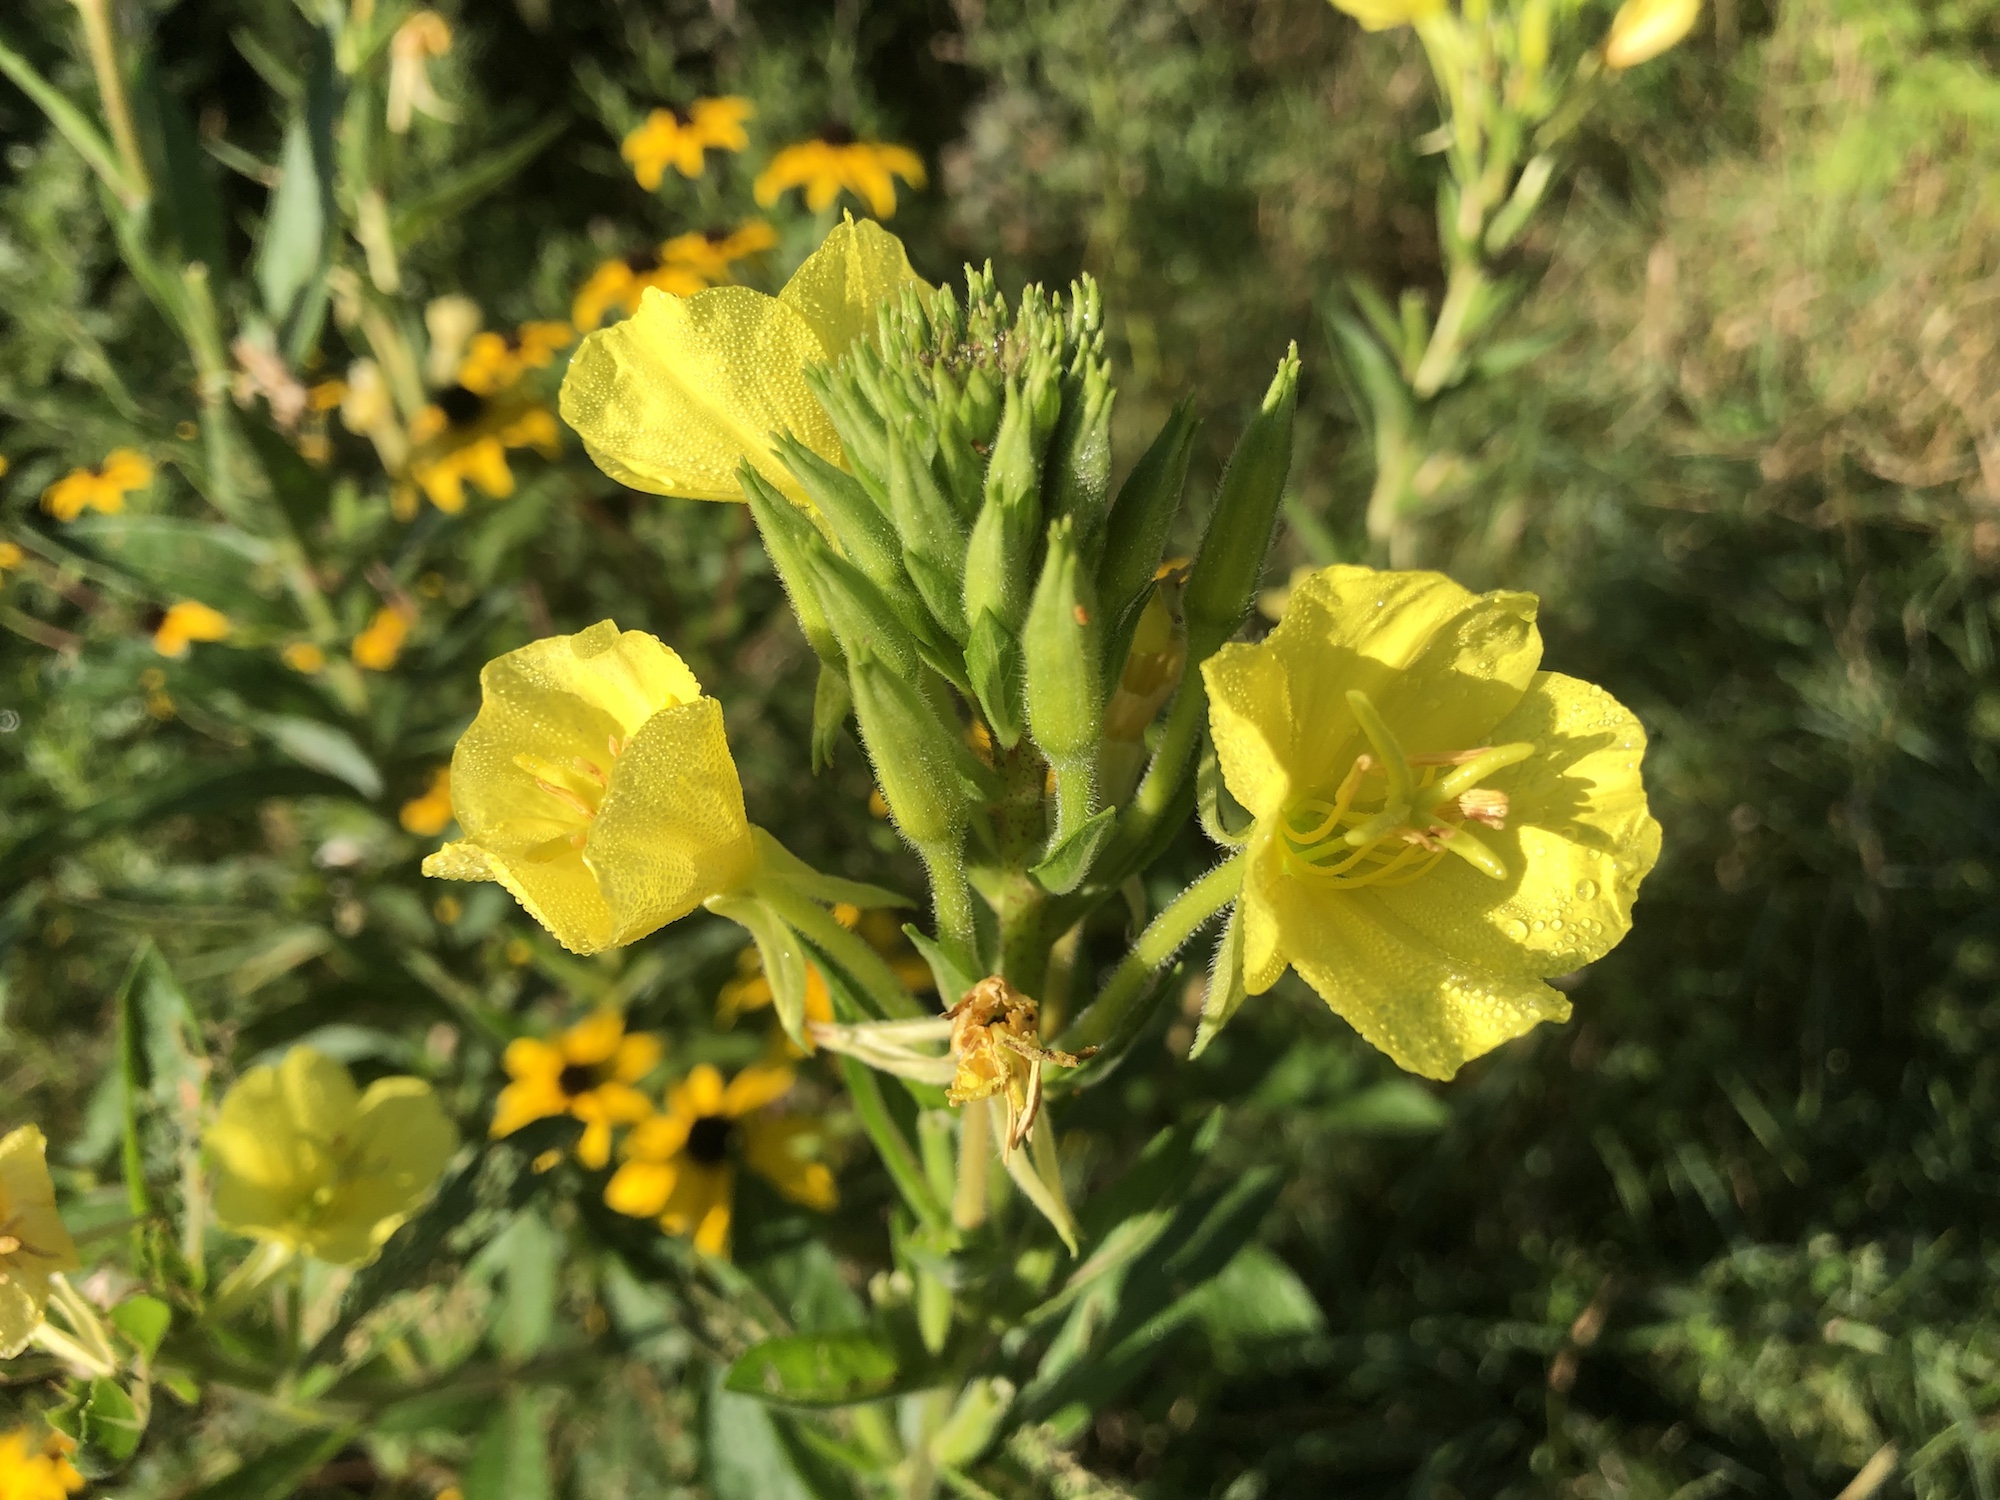 Evening Primrose along shore of the Retaining Pond on the corner of Nakoma Road and Manitou Way on August 24, 2019.